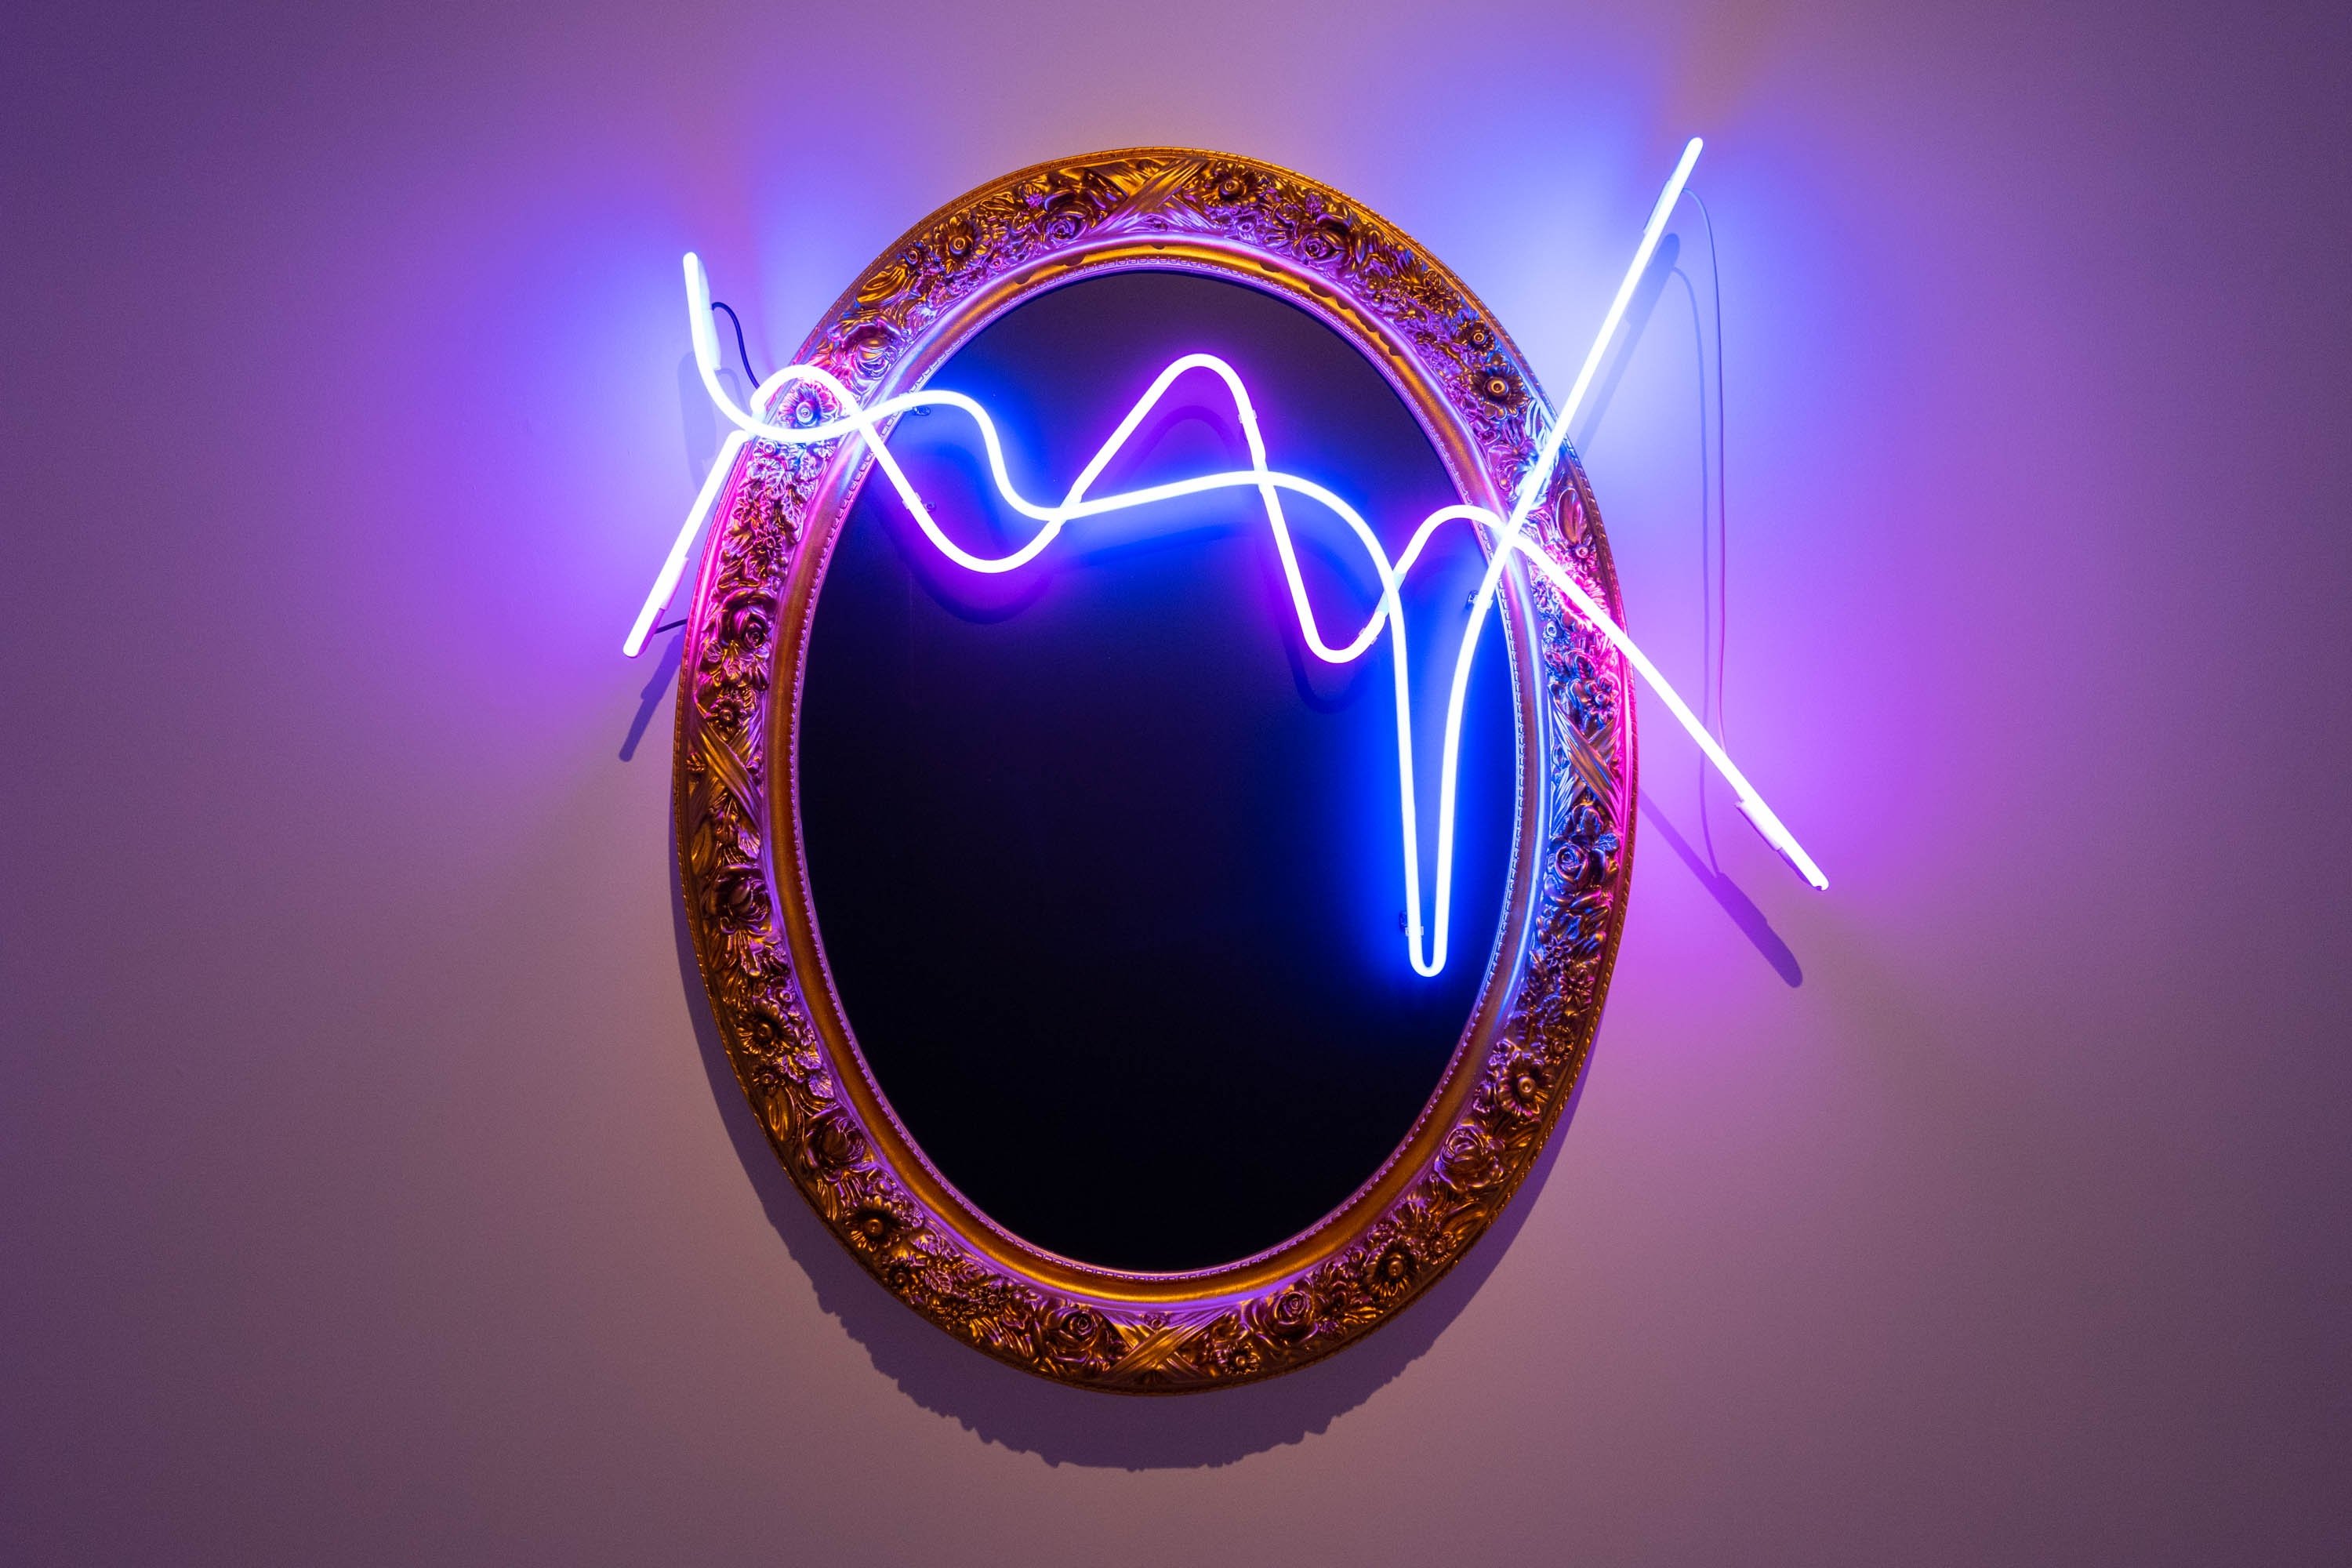 Fırat Engin, 'Frequency series I,' 2019, polyester frame, wood, neon, 120 by 130 centimeters.